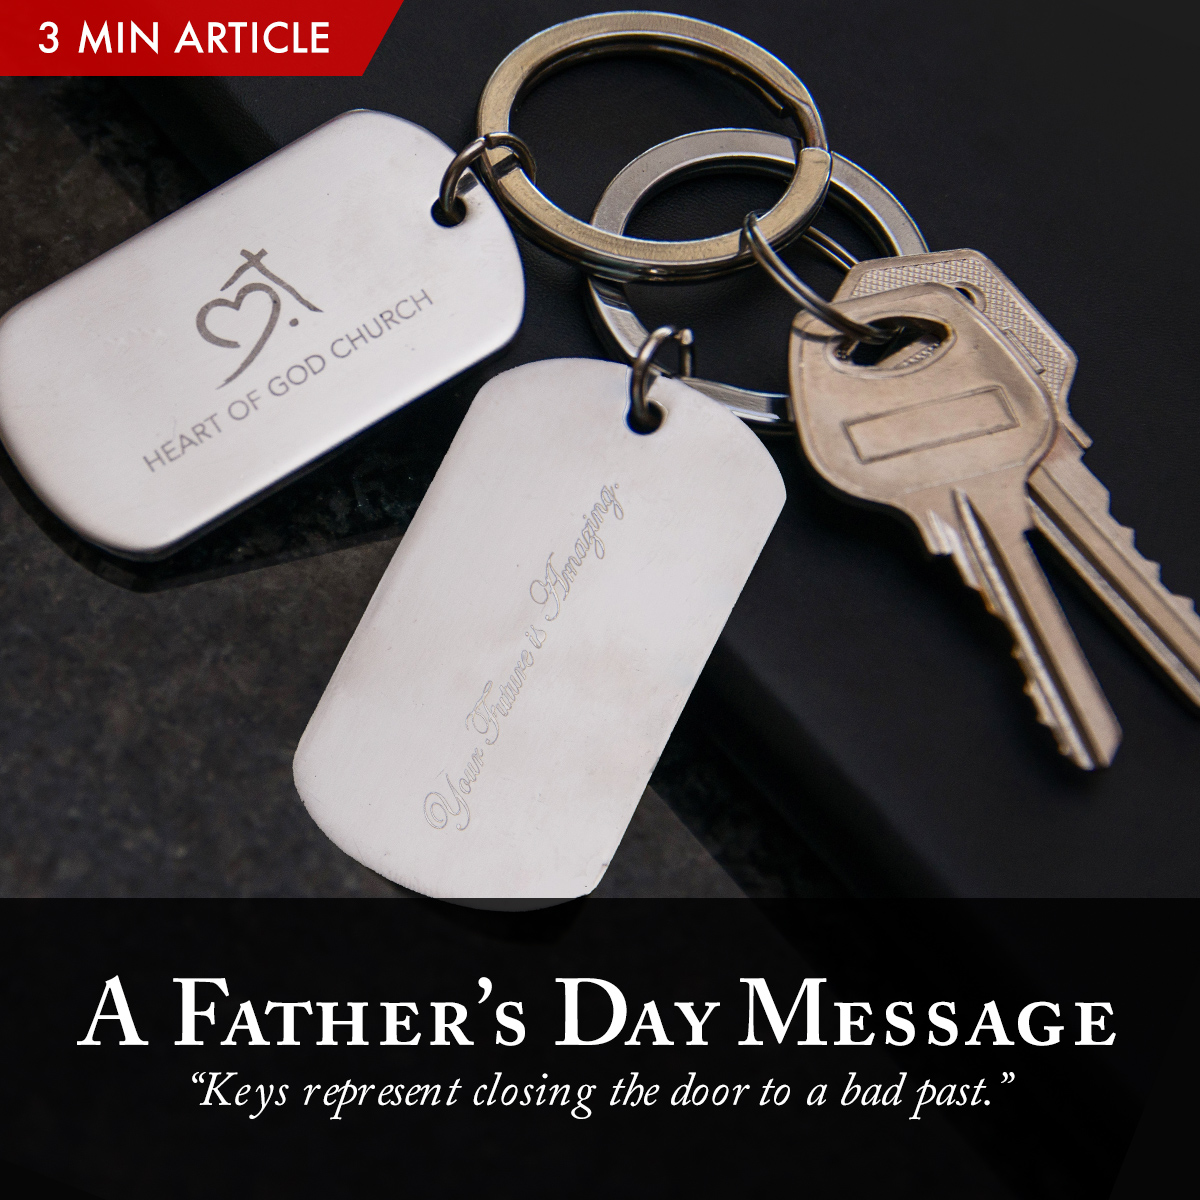 A Father’s Day message for Heart of God Church youths